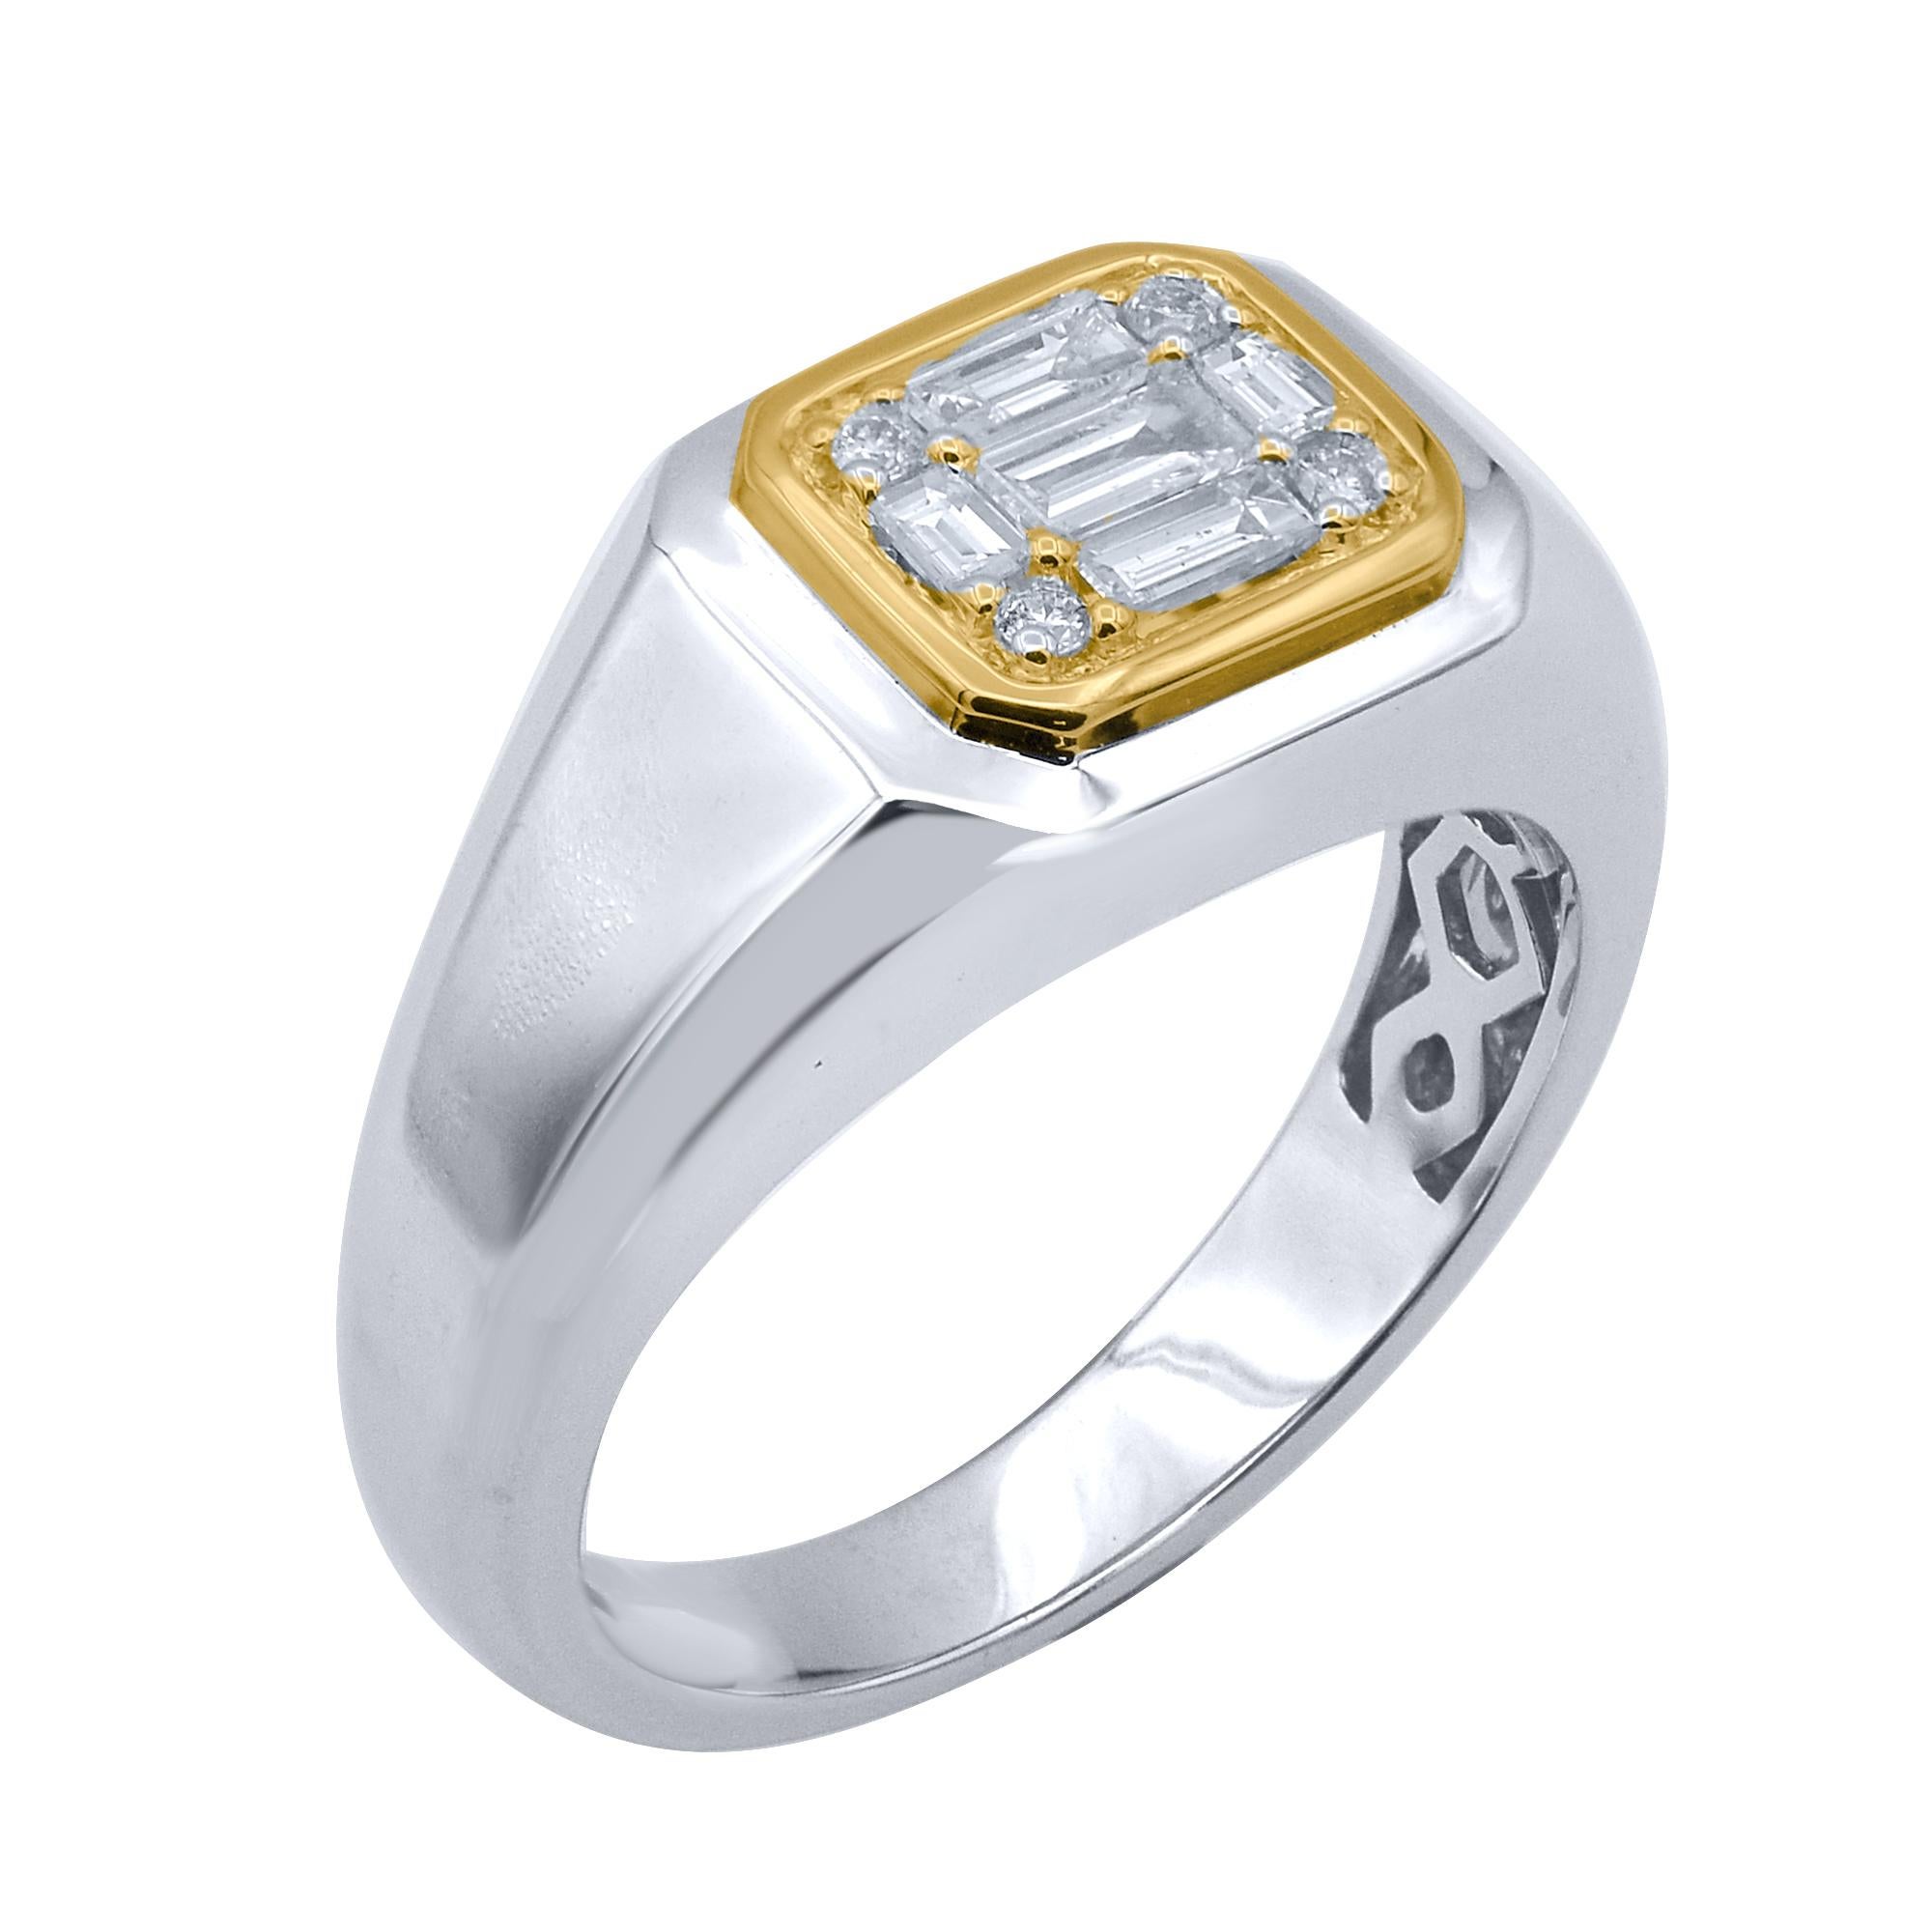 Raise the bar on your style when you wear this sophisticated diamond band ring. These band ring are studded with 9 brilliant cut & baguette natural diamonds in 18KT gold in prong setting . The white diamonds are graded as H-I color and I-2 clarity.